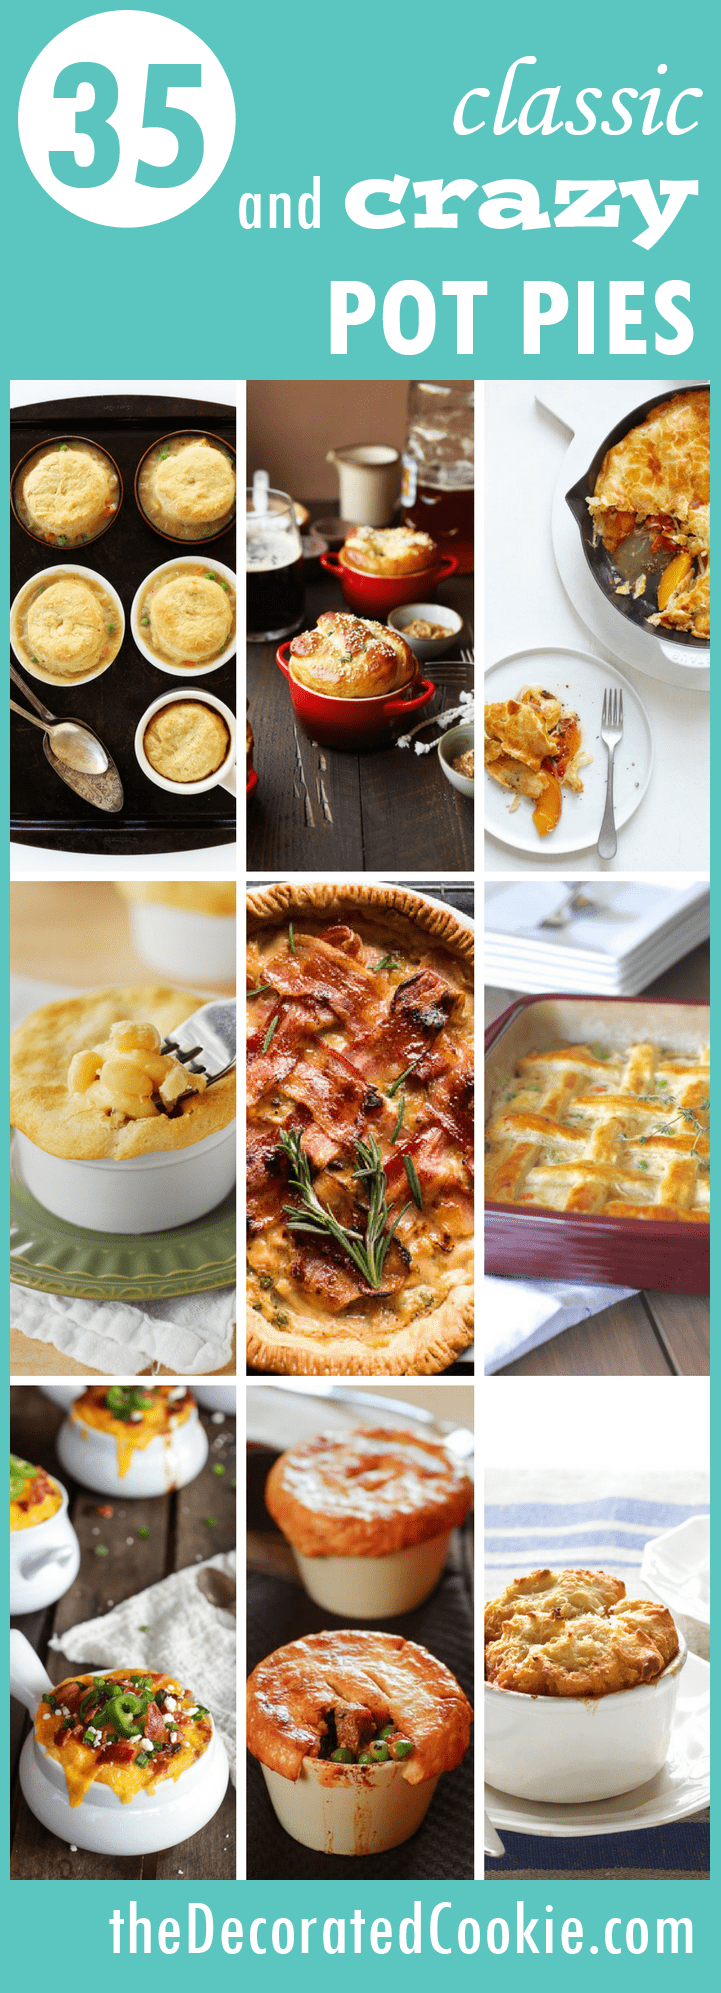 35 traditional and UNtraditional pot pie recipes - classic and crazy pot pie recipes